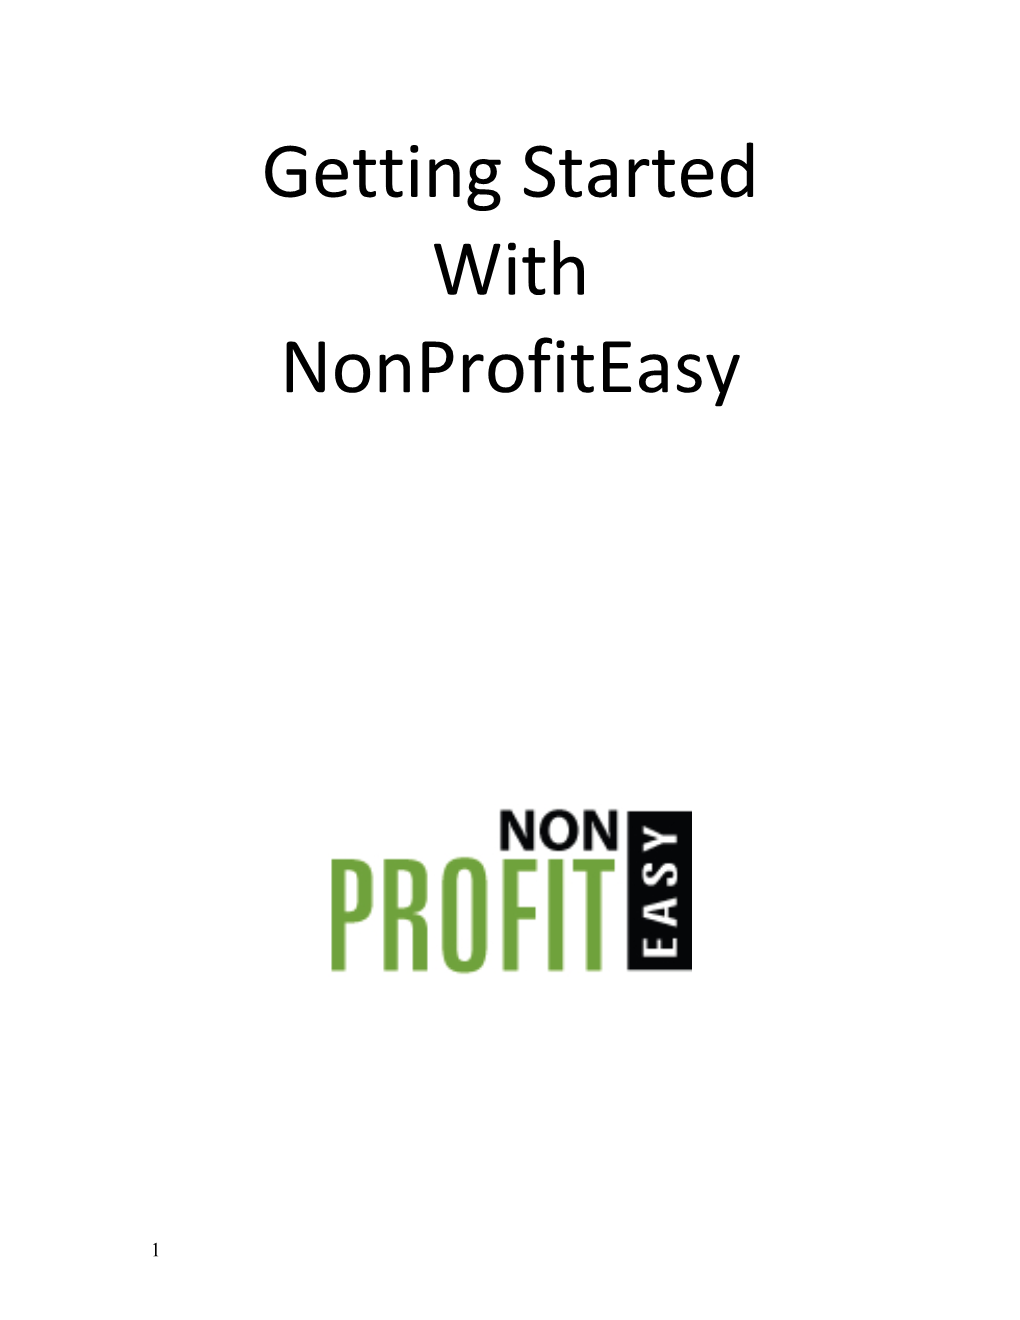 Getting Help with Nonprofiteasy 3